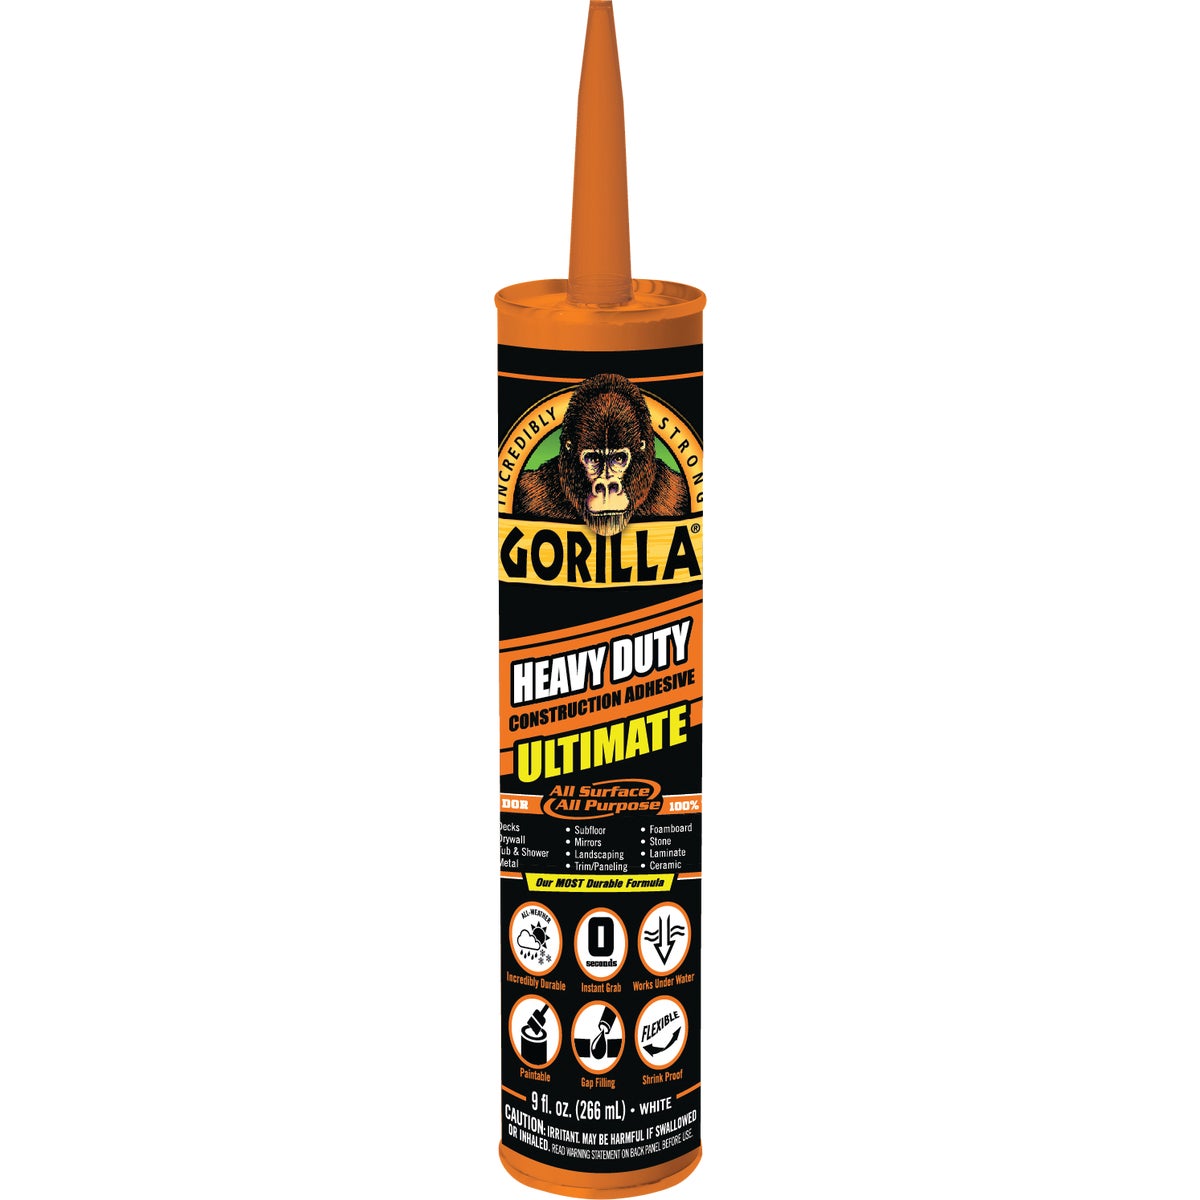 Item 794416, Gorilla Heavy Duty Construction Adhesive Ultimate is tough, versatile, and 